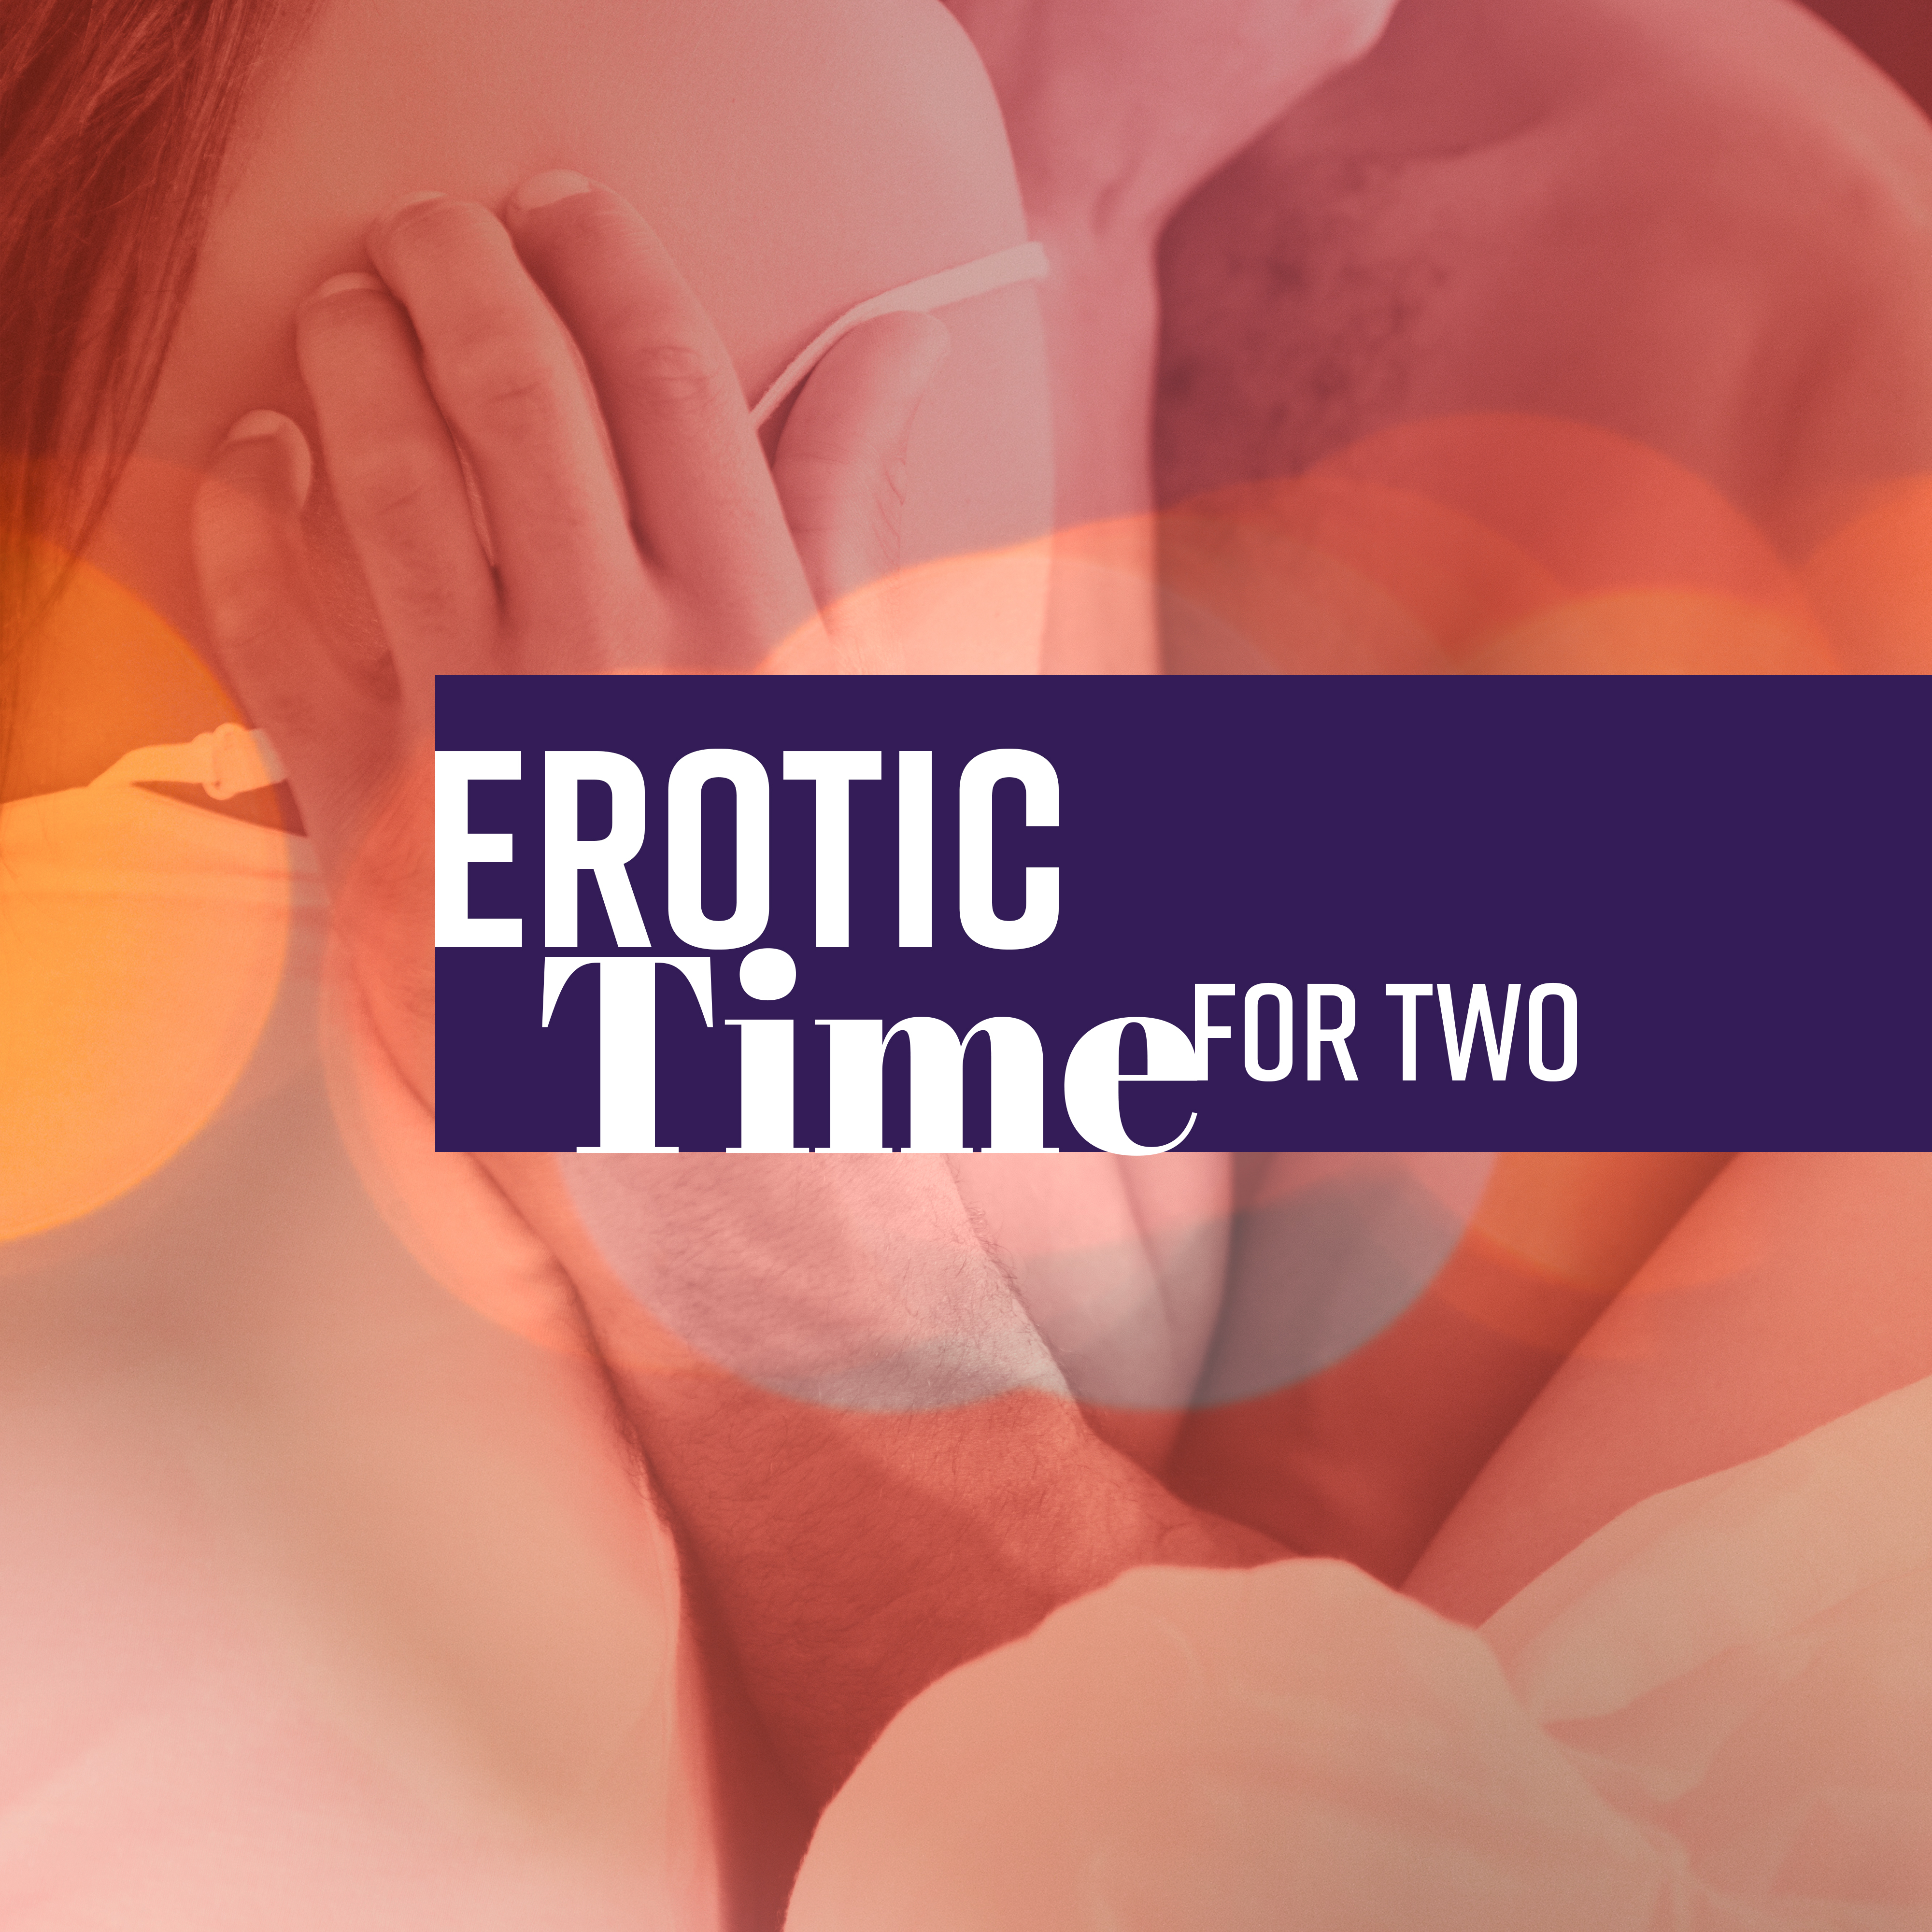 Erotic Time for Two